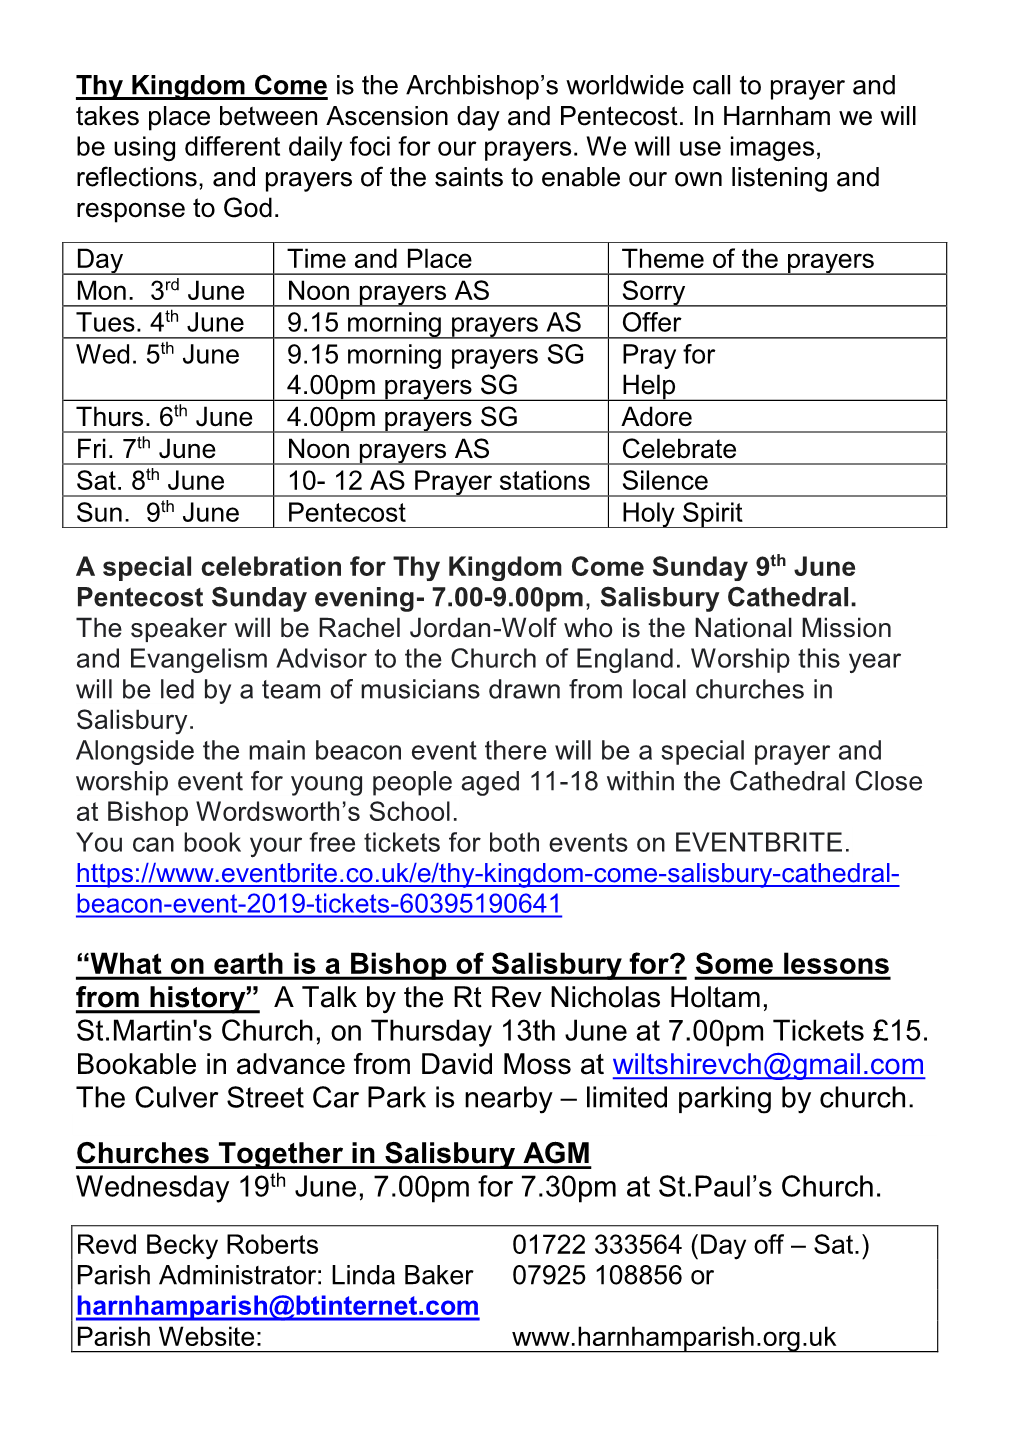 A Talk by the Rt Rev Nicholas Holtam, St.Martin's Church, on Thursday 13Th June at 7.00Pm Tickets £15